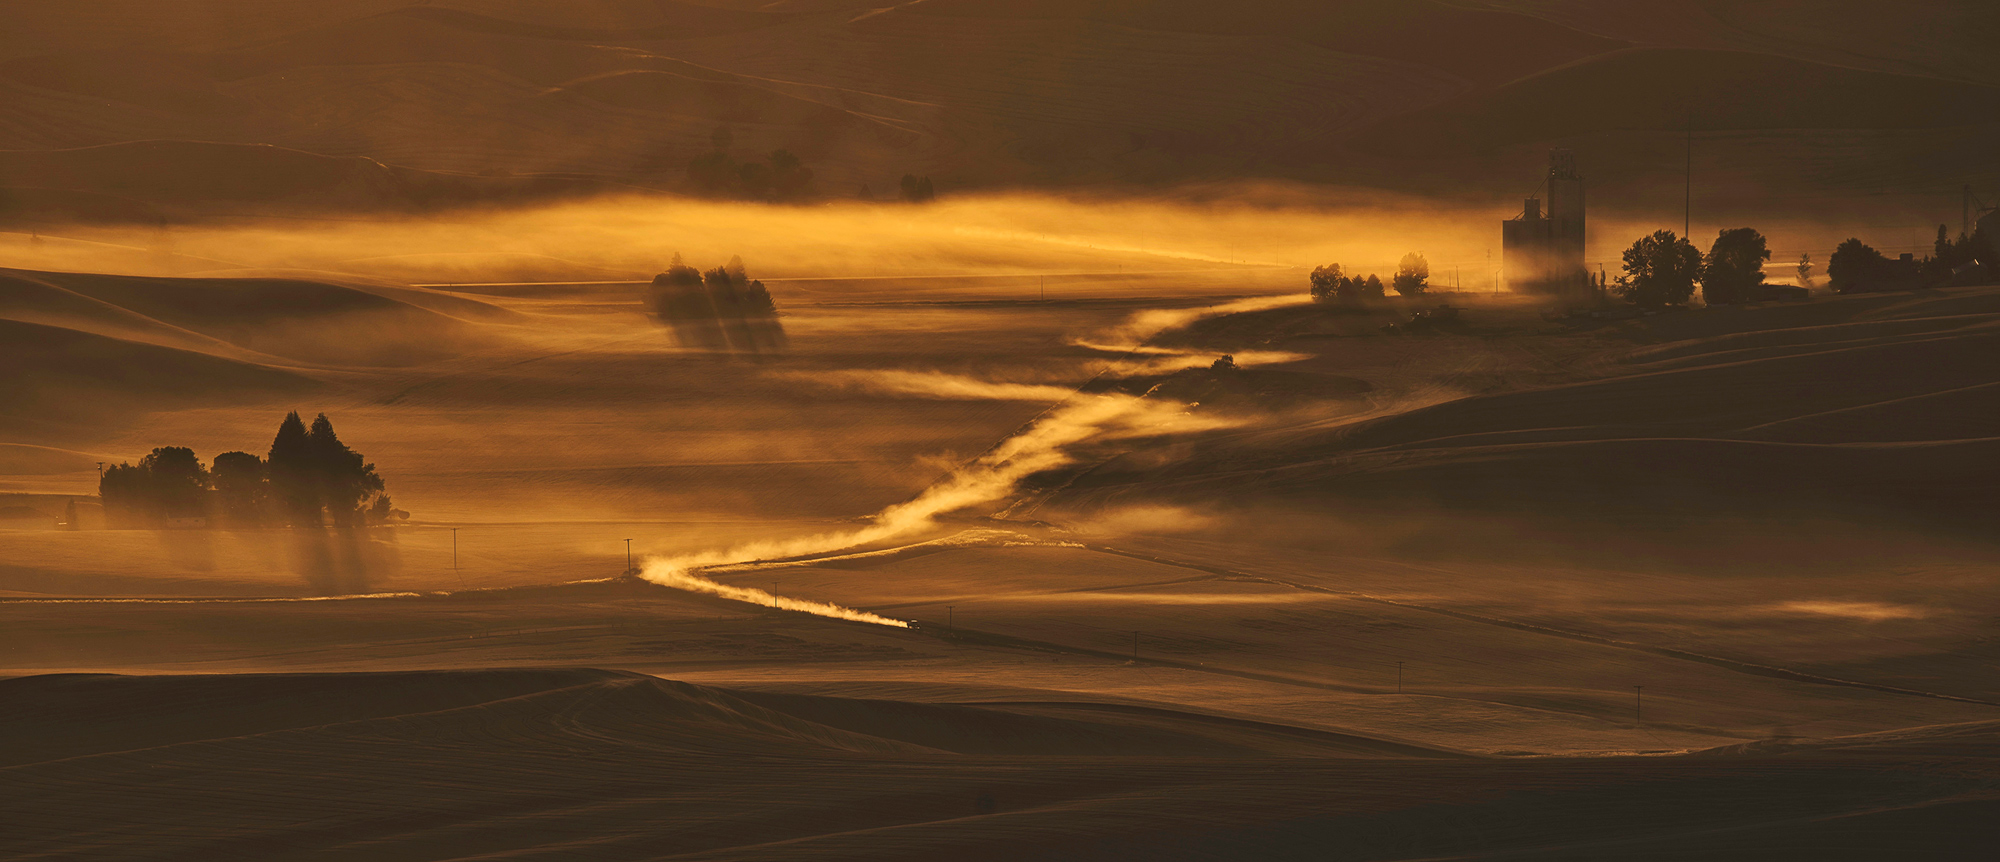 The ride home, dust trail, Palouse, 400mm lens in the Palouse